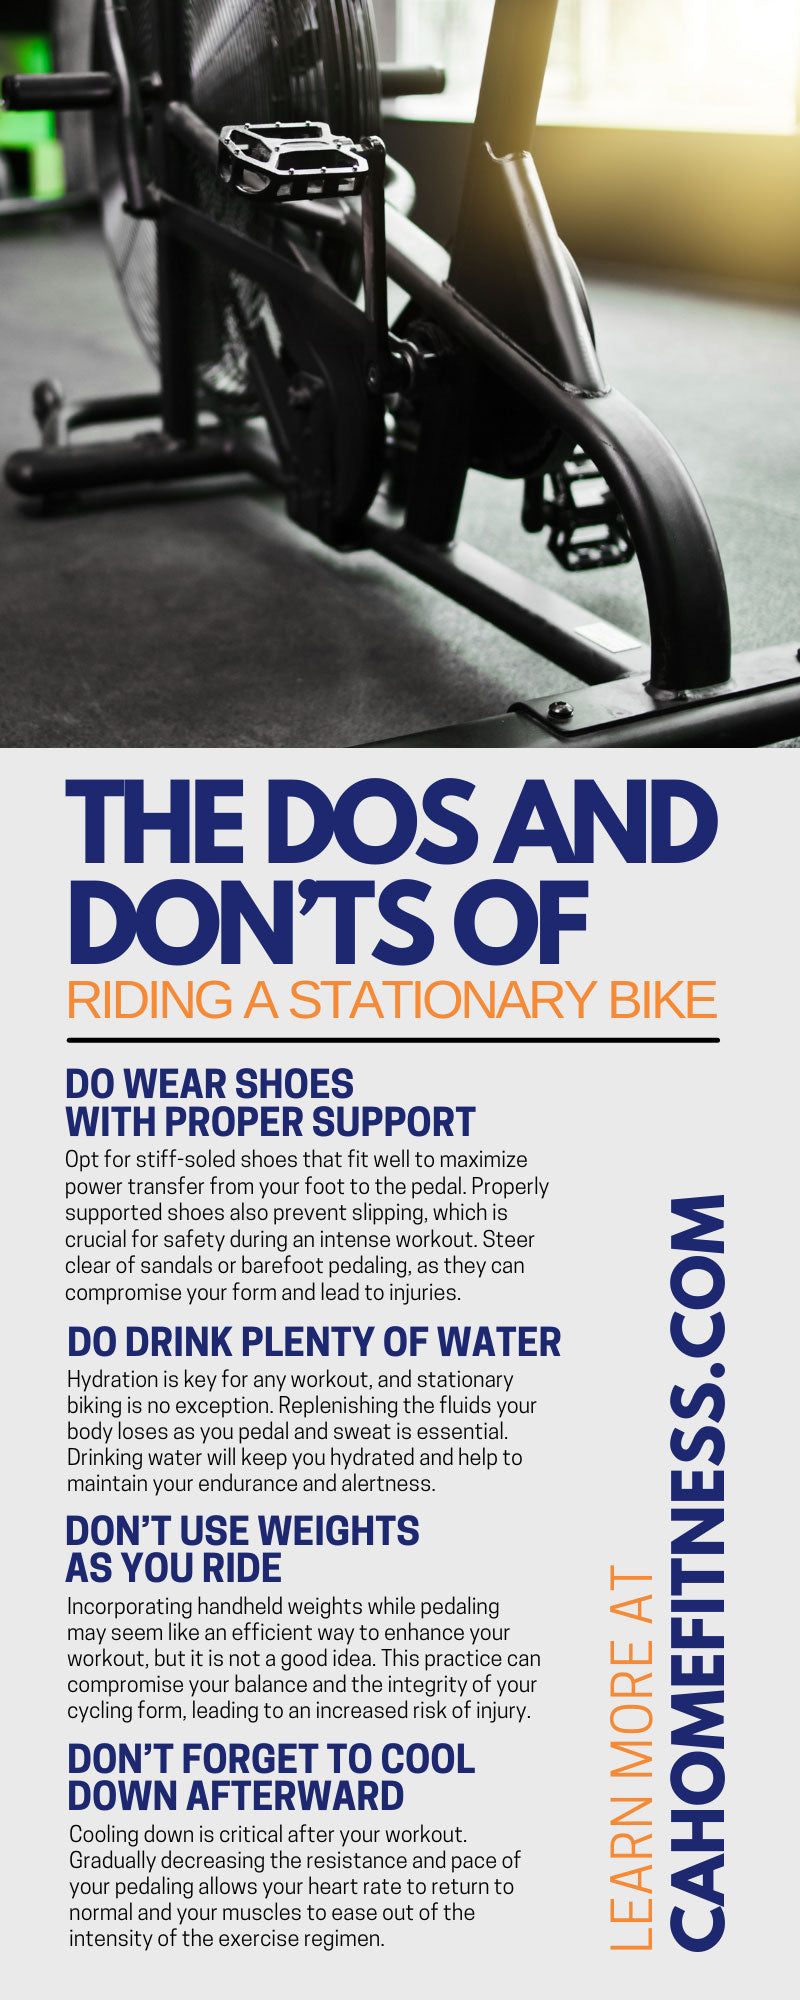 The Dos and Don’ts of Riding a Stationary Bike